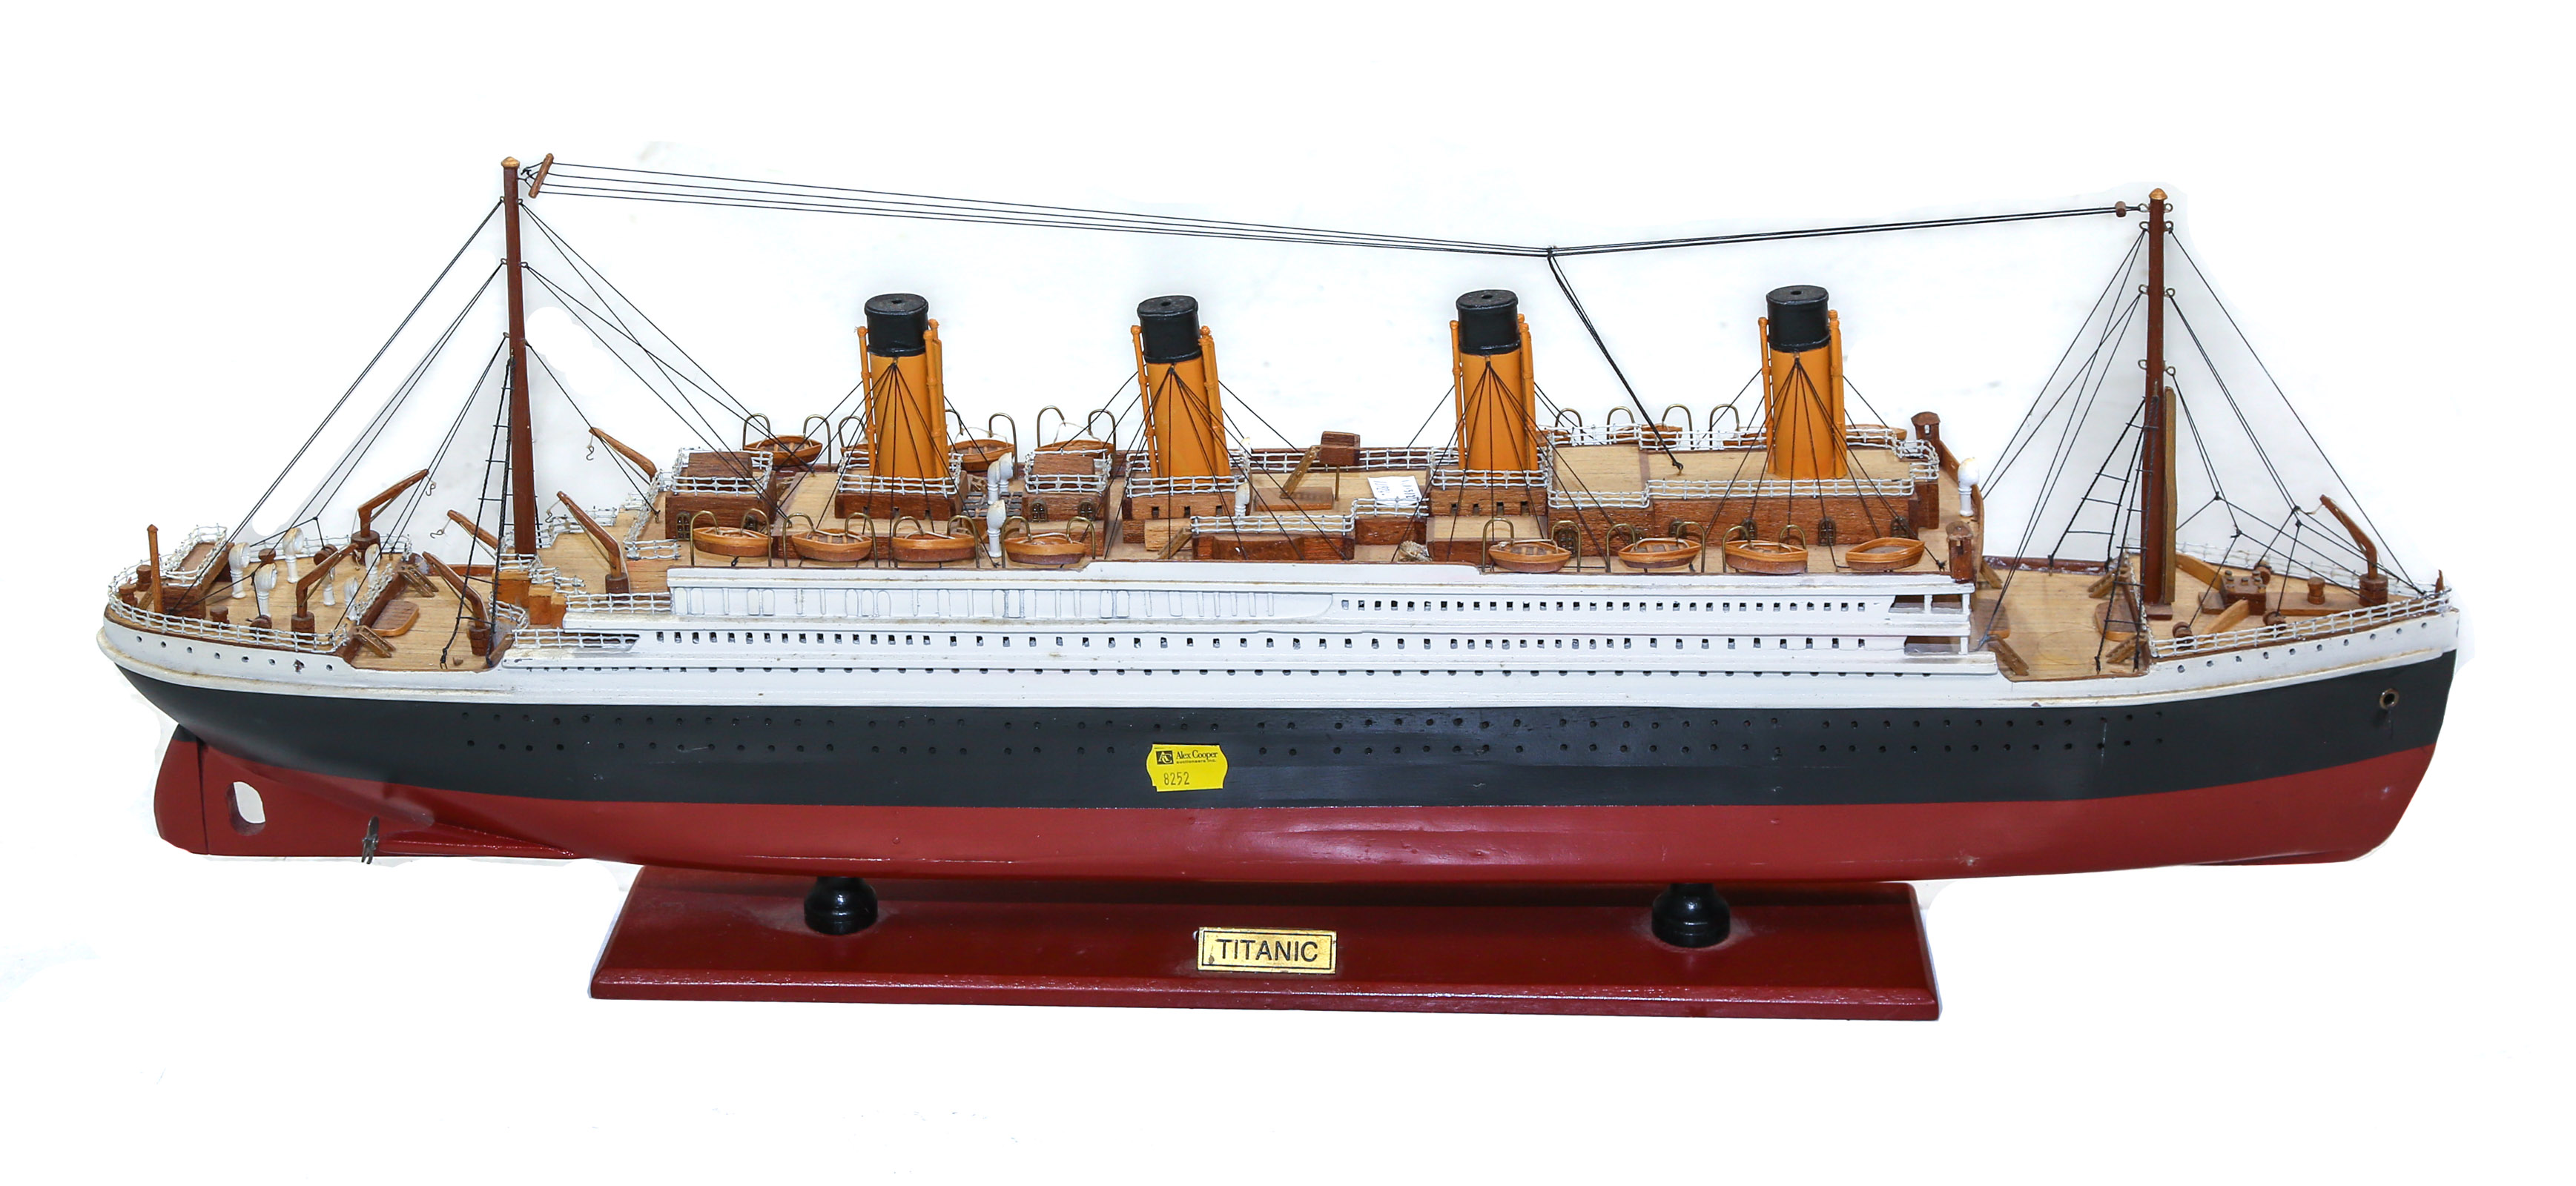 SCALE MODEL OF THE STEAMSHIP "TITANIC"